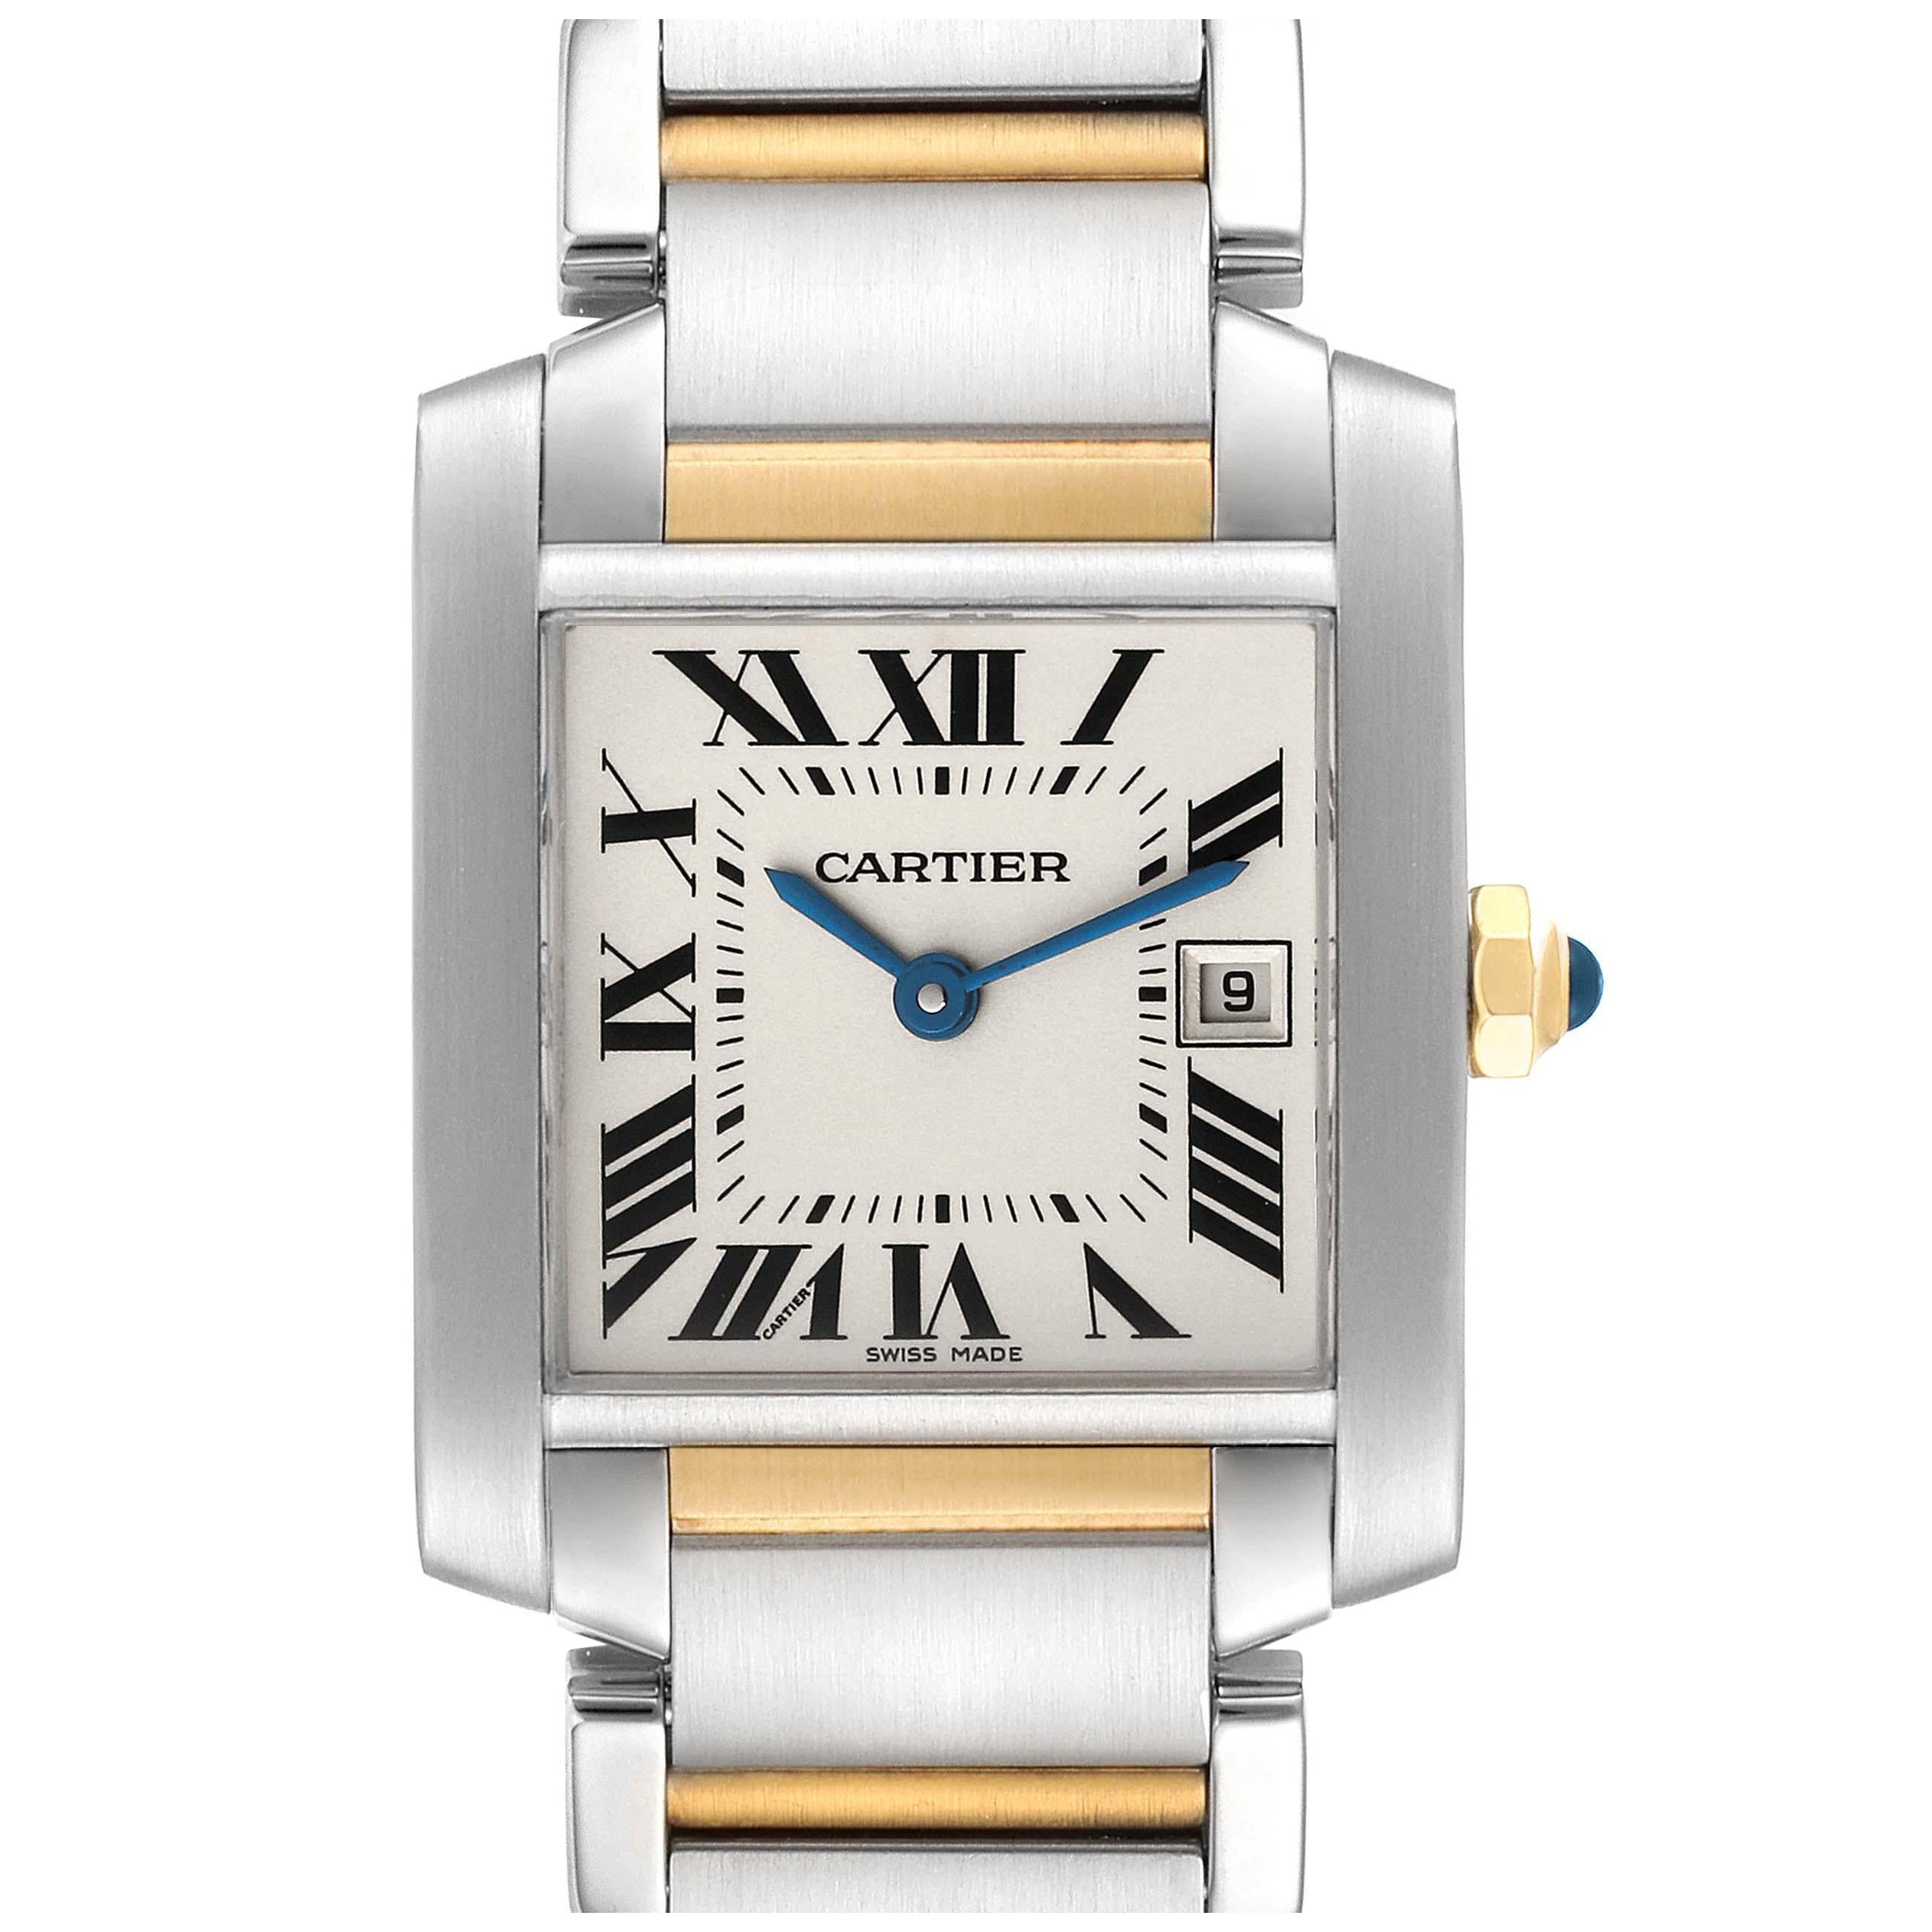 Cartier Tank Francaise Midsize Steel Yellow Gold Ladies Watch W51012Q4